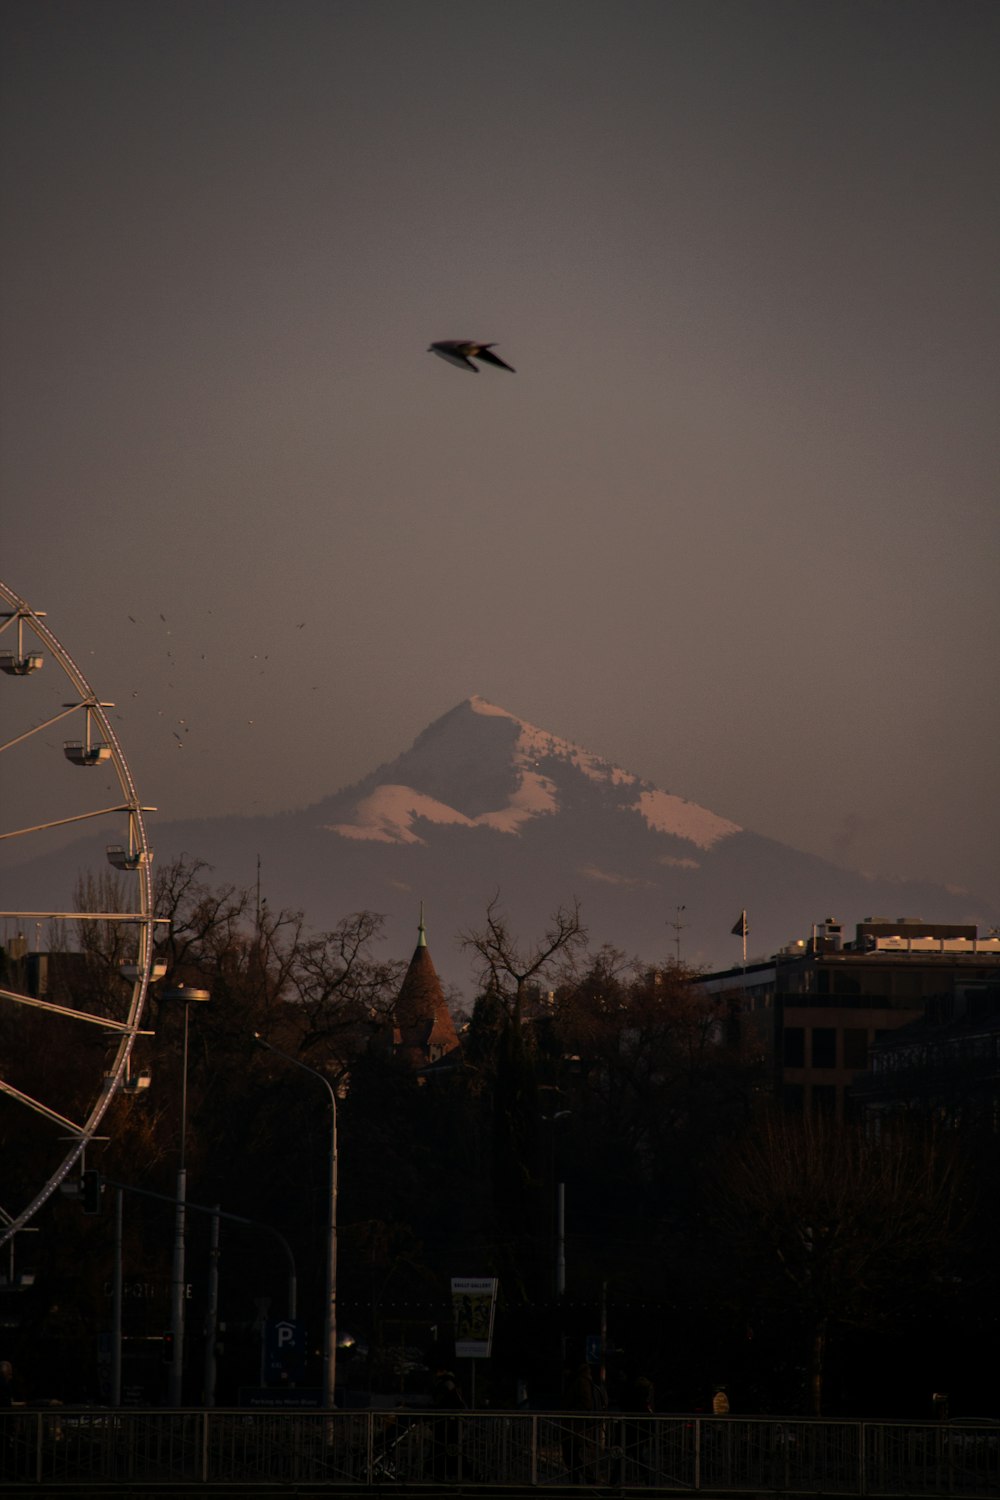 a ferris wheel and a mountain in the background